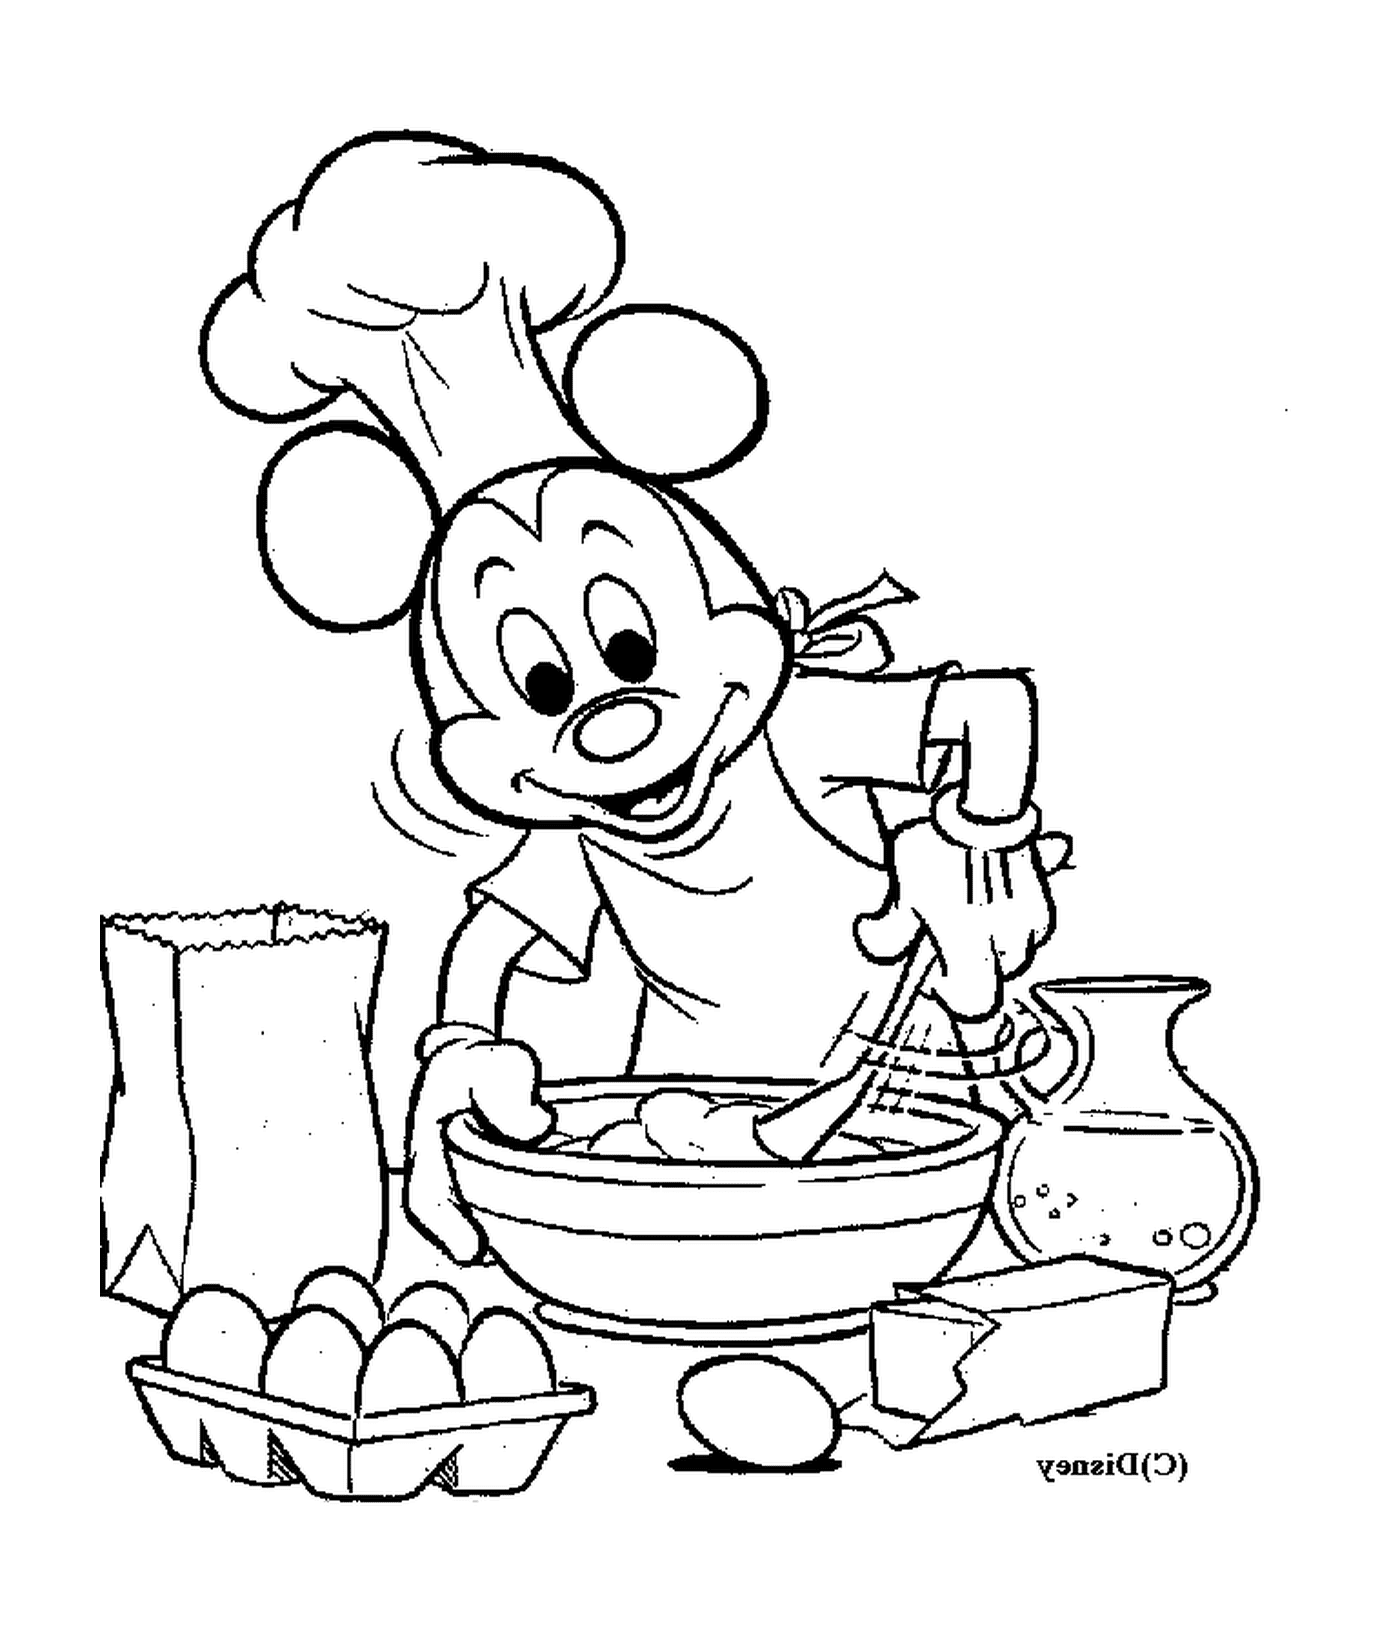  Mickey kitchen: chef Mickey Mouse mixing eggs 